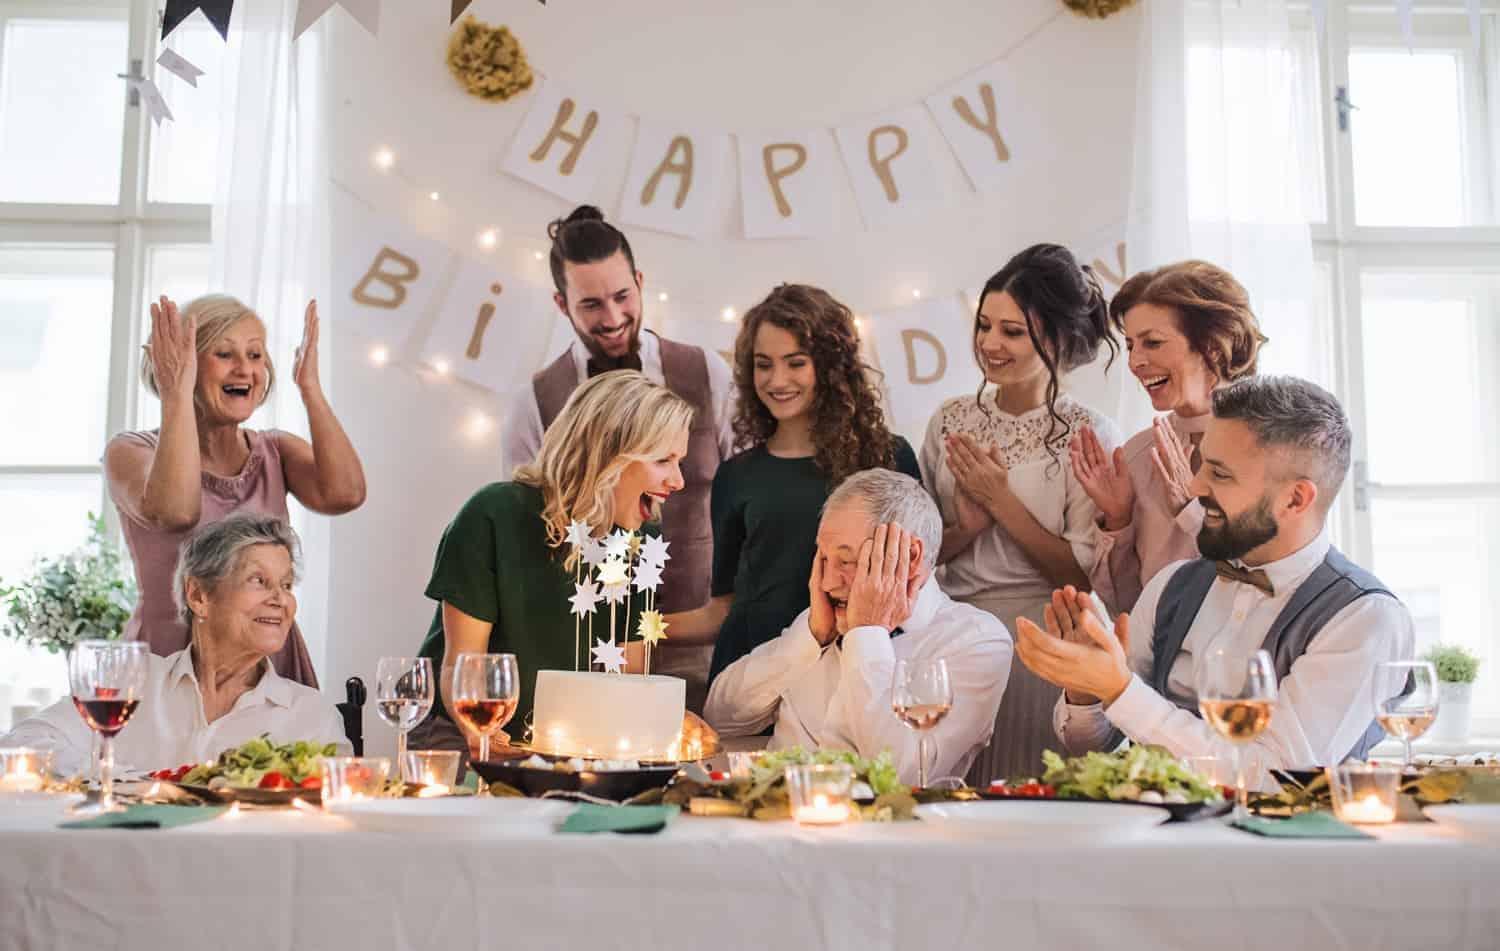 A joyful family gathering to celebrate a senior man's birthday, with loved ones cheering and smiling around a table decorated with flowers and candles, under a banner reading "happy birthday".